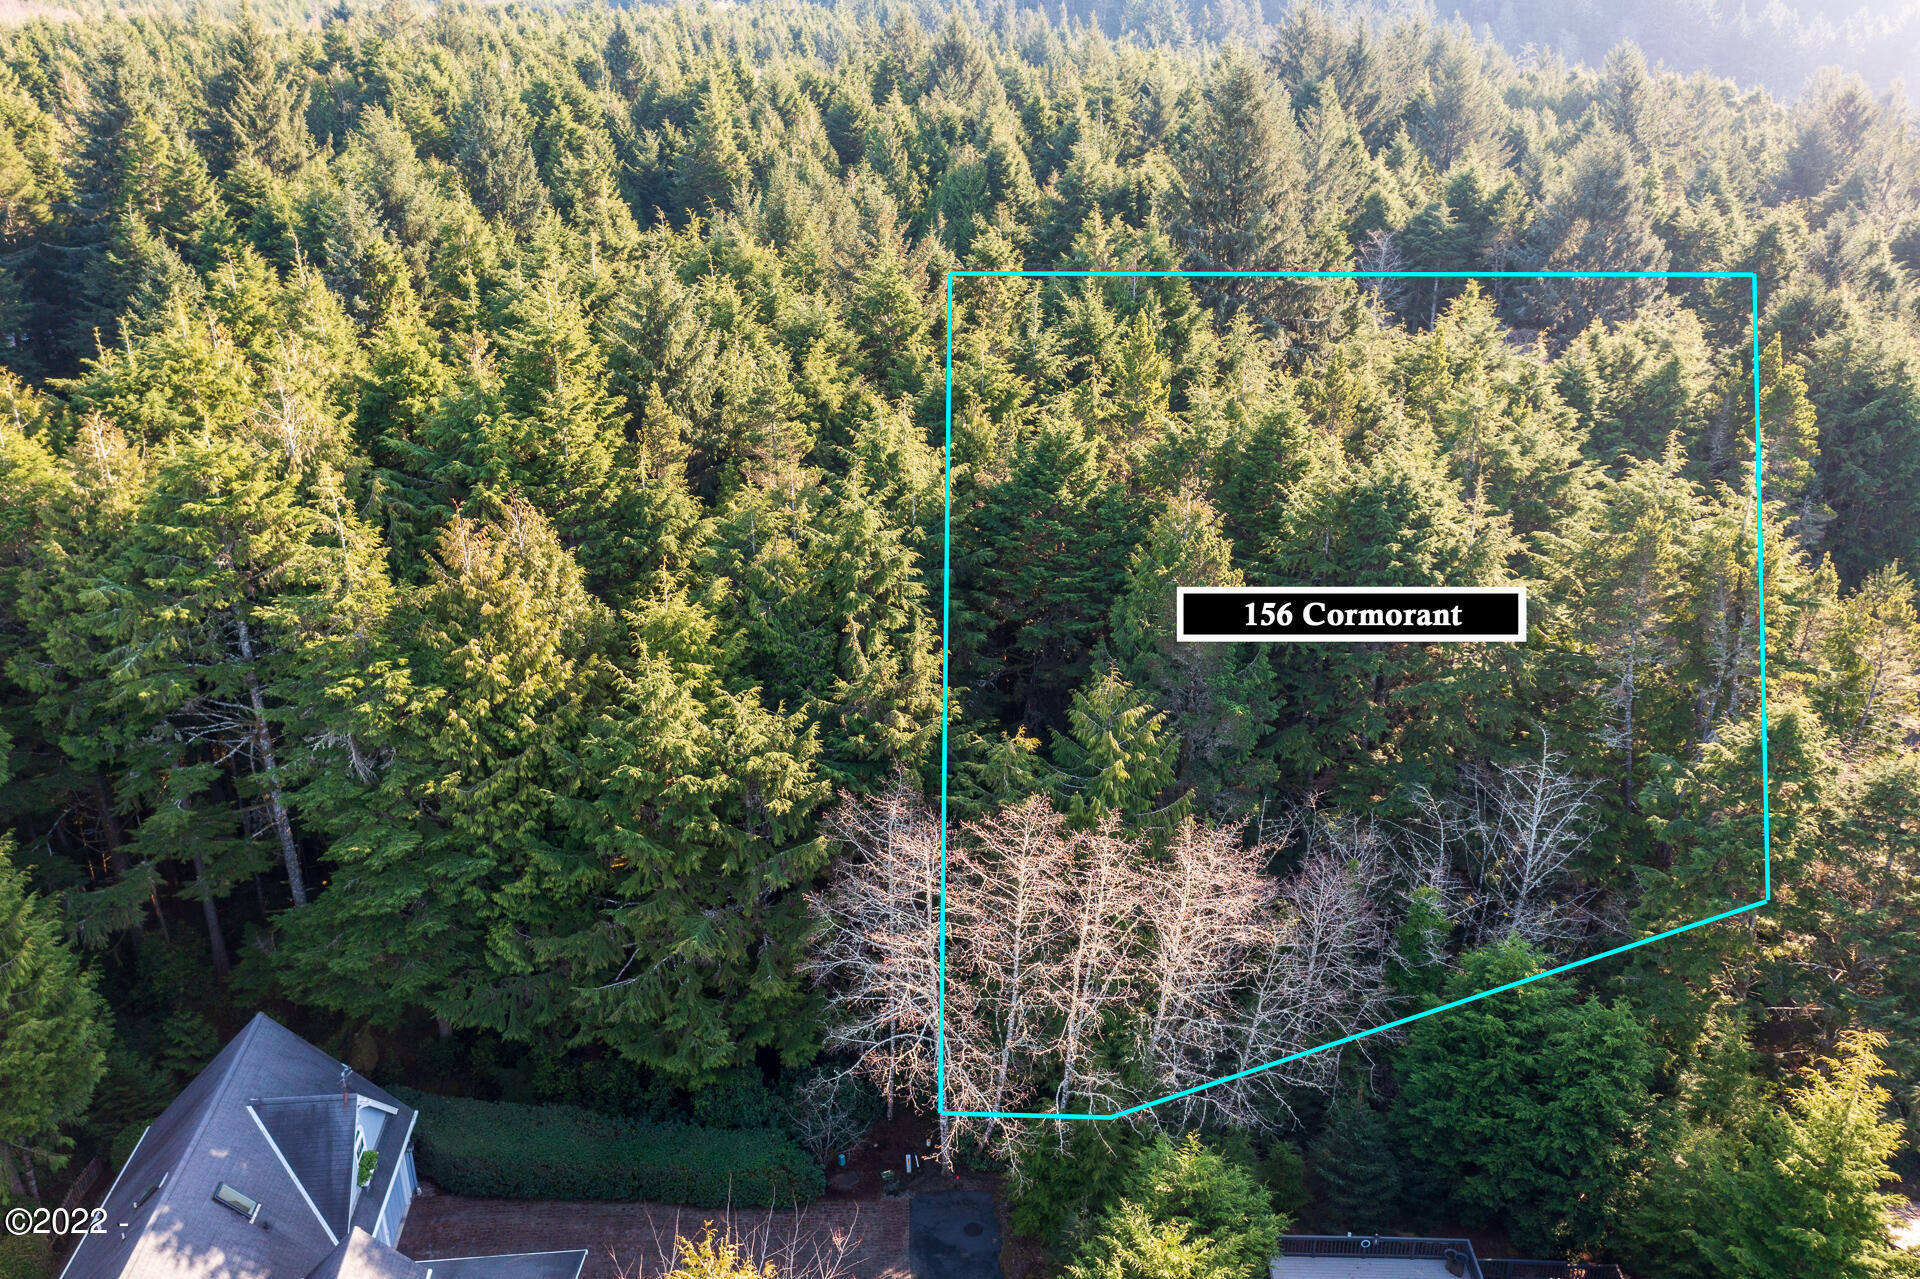 Lot 156 SW Cormorant Depoe Bay, Gleneden Beach, Lincoln City, Newport, Otis, Rose Lodge, Seal Rock, Waldport, Yachats, To Home Listings - Amy Plechaty, Emerald Coast Realty Real Estate, homes for sale, property for sale